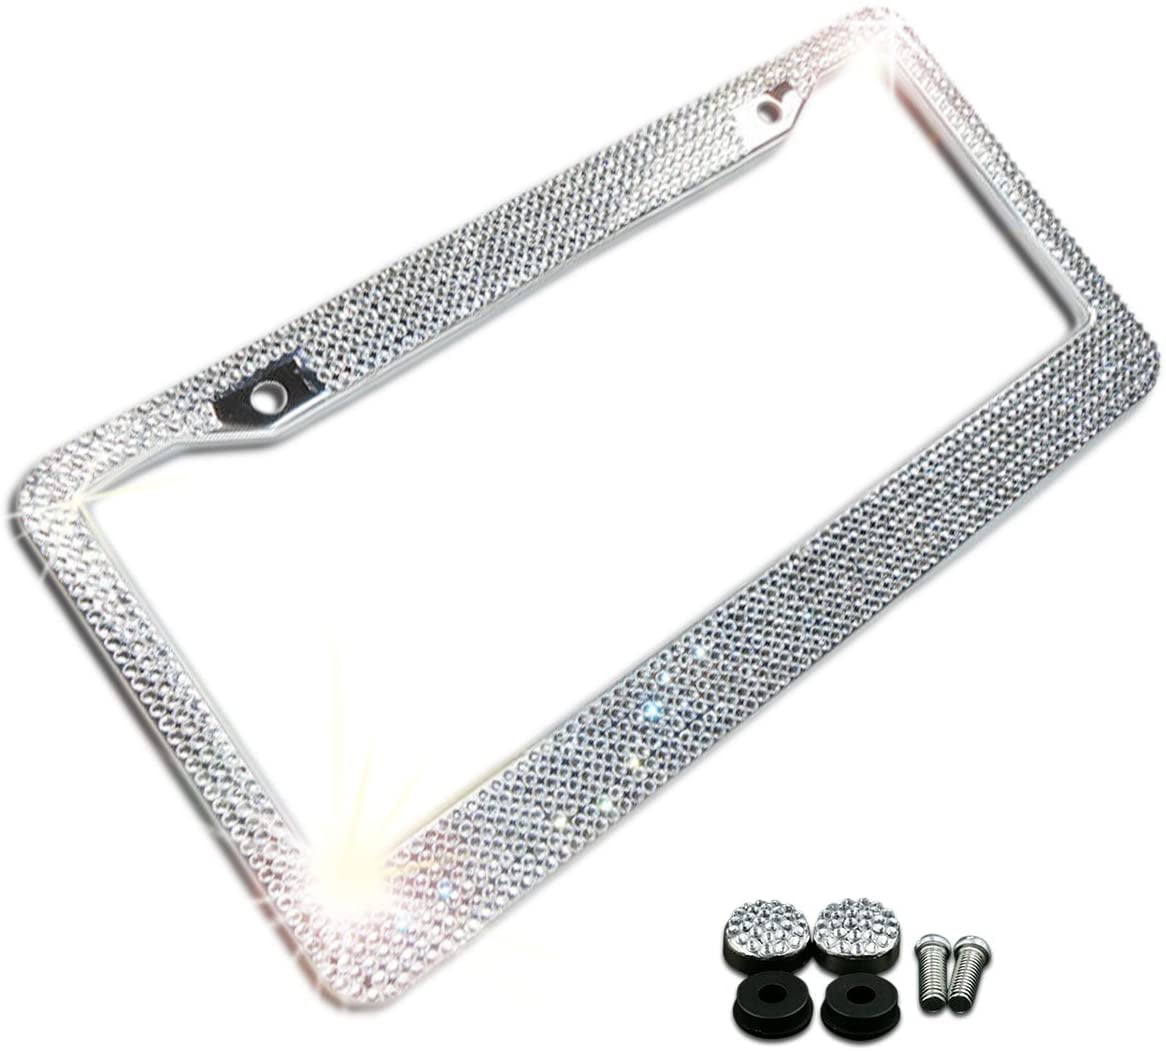 Zone Tech Shiny Bling License Plate Cover Frame Crystal Bling Premium Quality Novelty/License Plate Frame with Mounting Screws